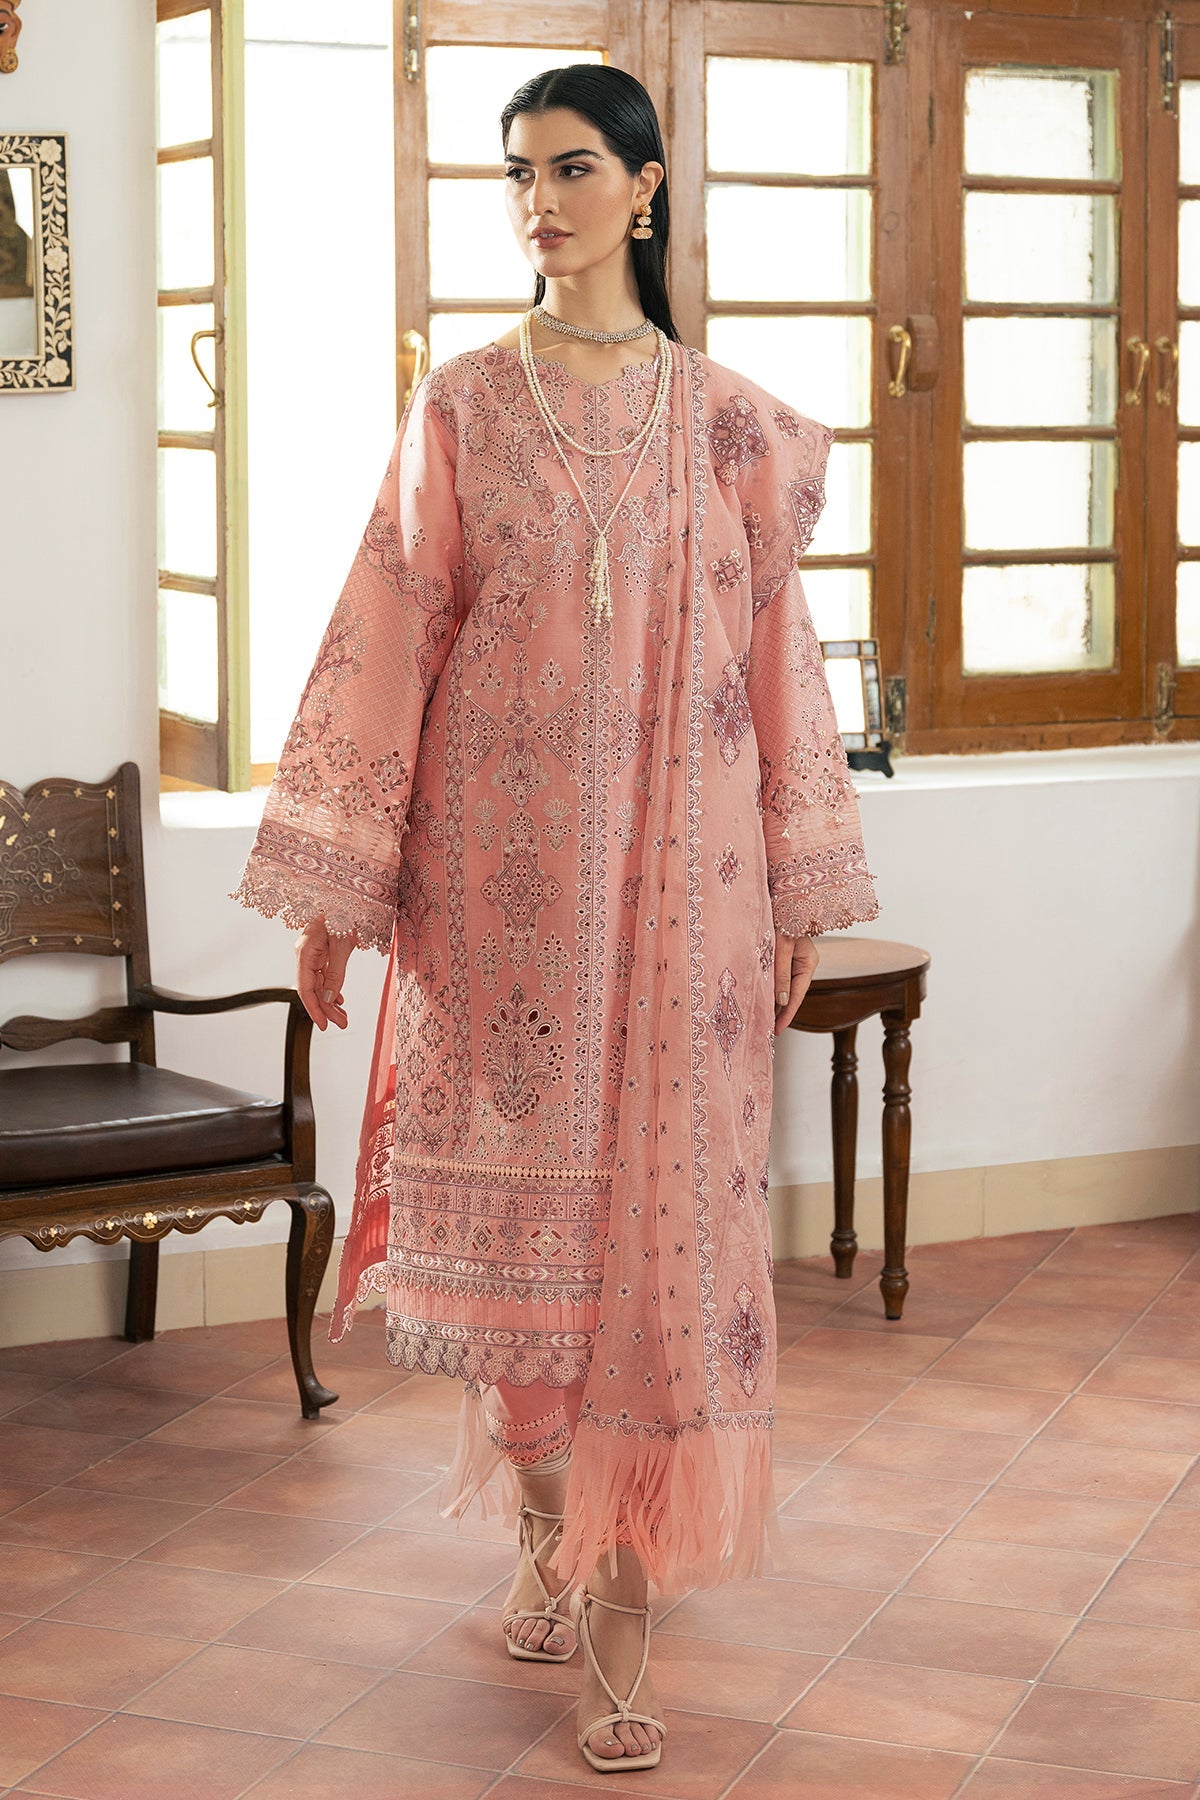 Shop Now, D-08 - Embroidered Swiss Lawn 2023 - Baroque - Shahana Collection UK - Wedding and Bridal Party Dresses 